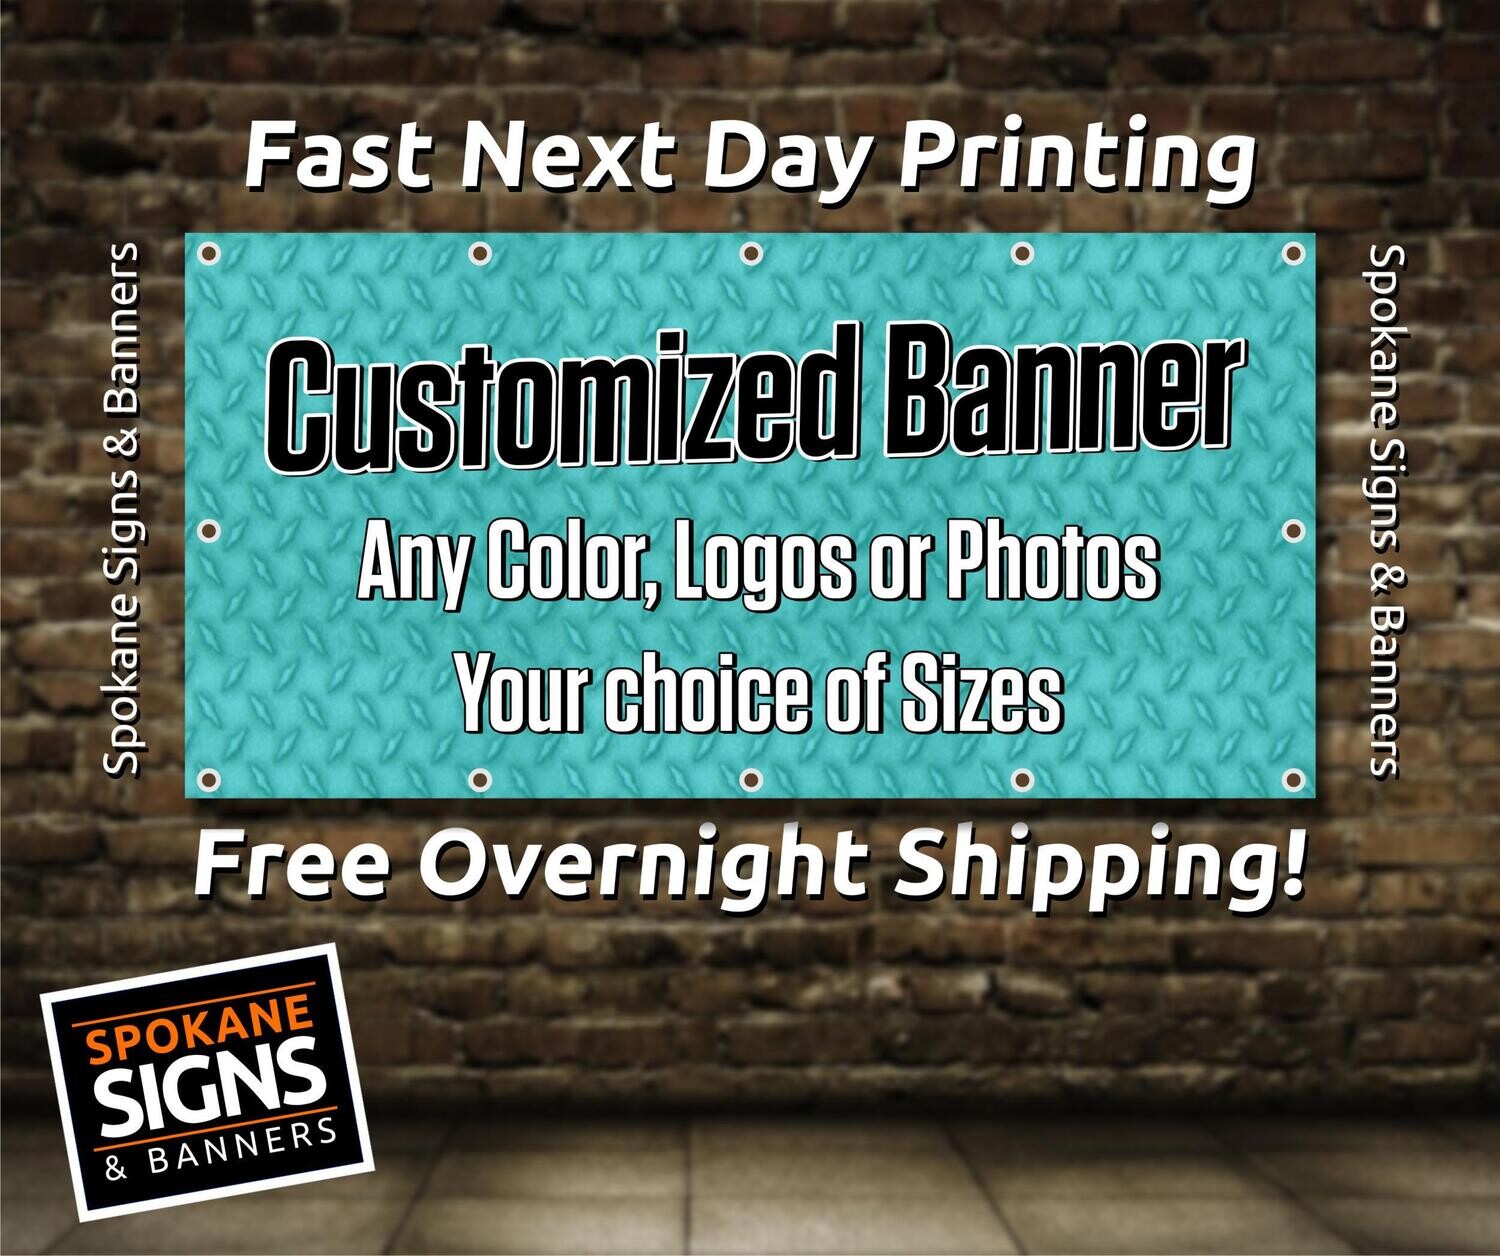 ** ORDER ONLINE NOW ** Custom Printed Heavy Duty Outdoor UV Banners - 13oz Vinyl Scrim - Next Day Printing - Free Overnight Shipping